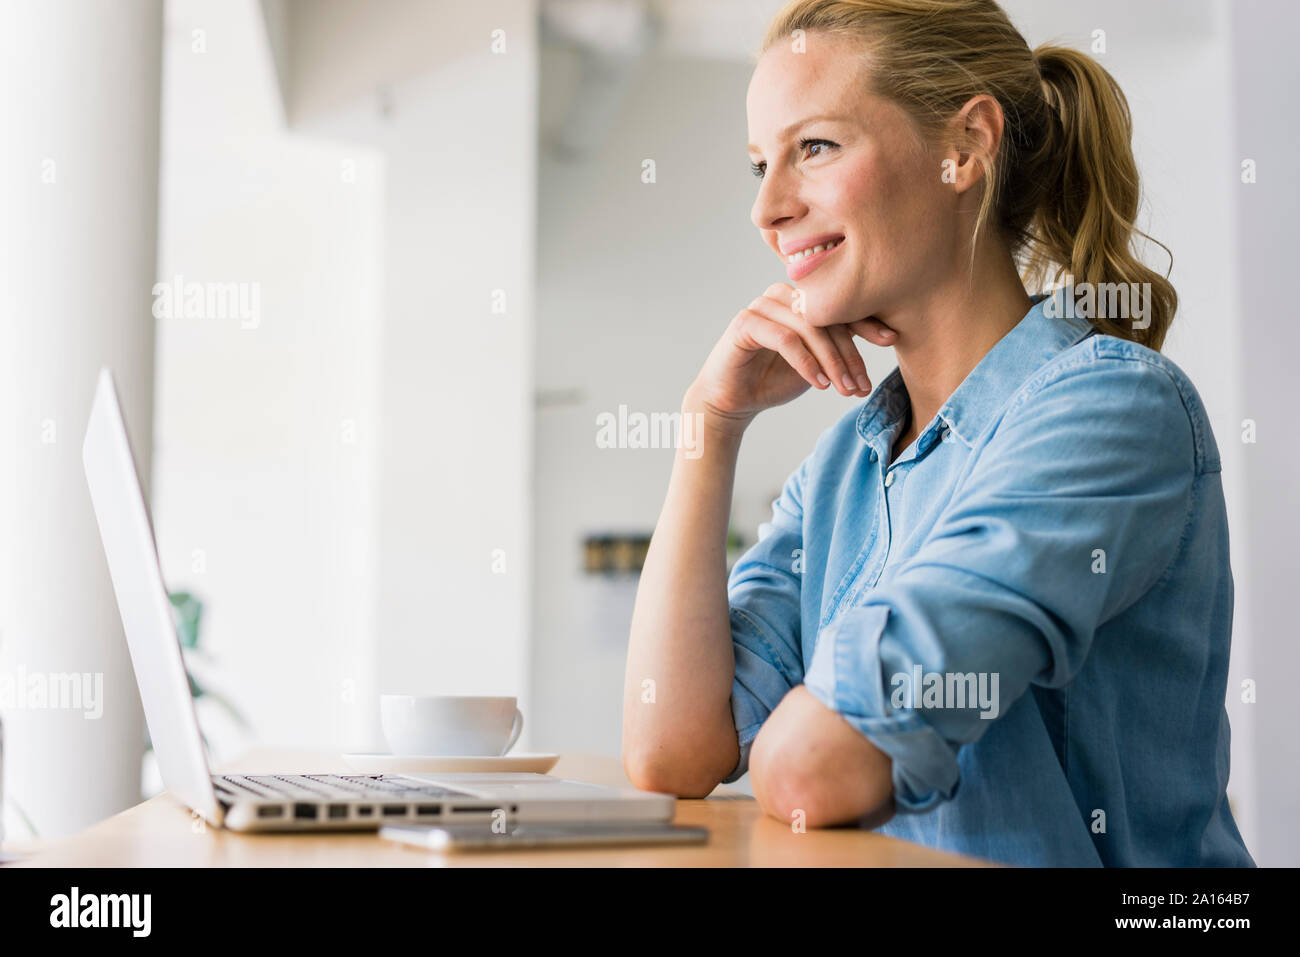 Woman in coffee shop, using laptop Banque D'Images